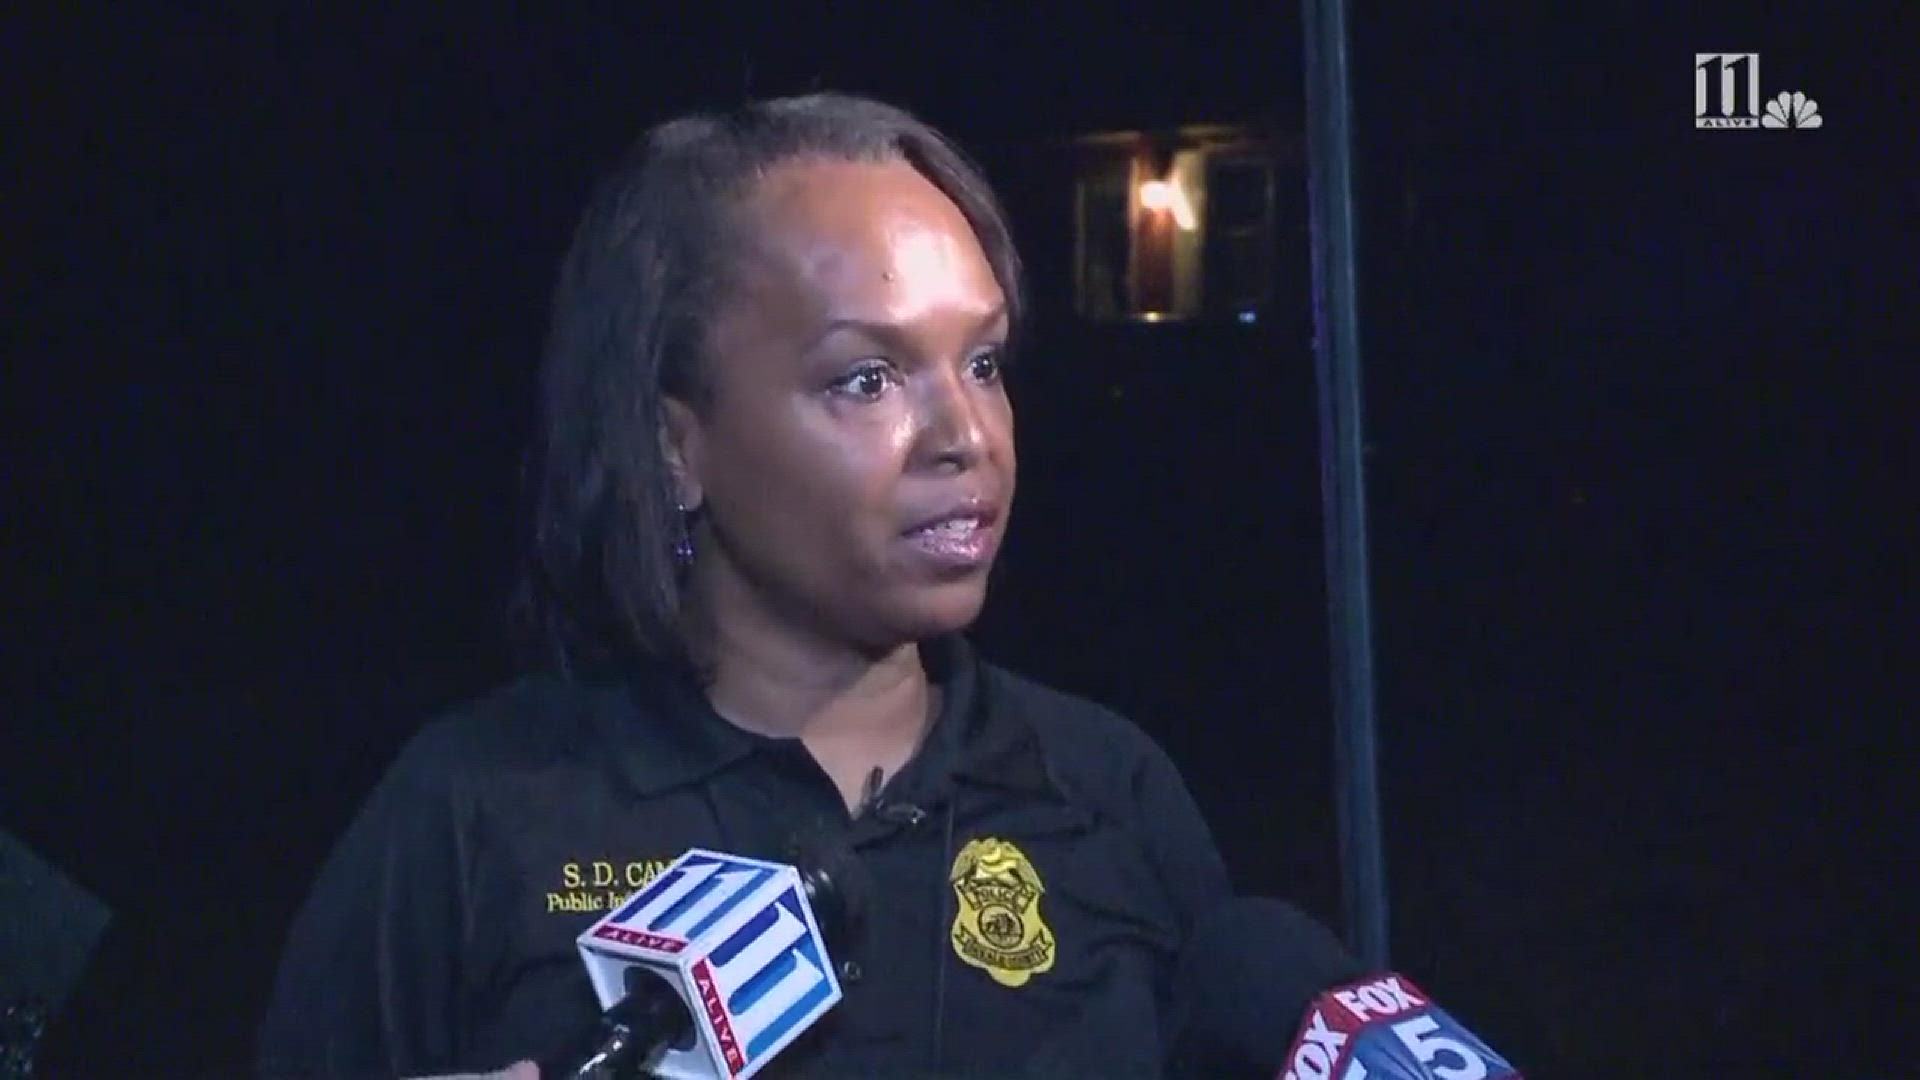 DeKalb Police Department spokesperson Shiera Campbell speaks with 11Alive at the crime scene.